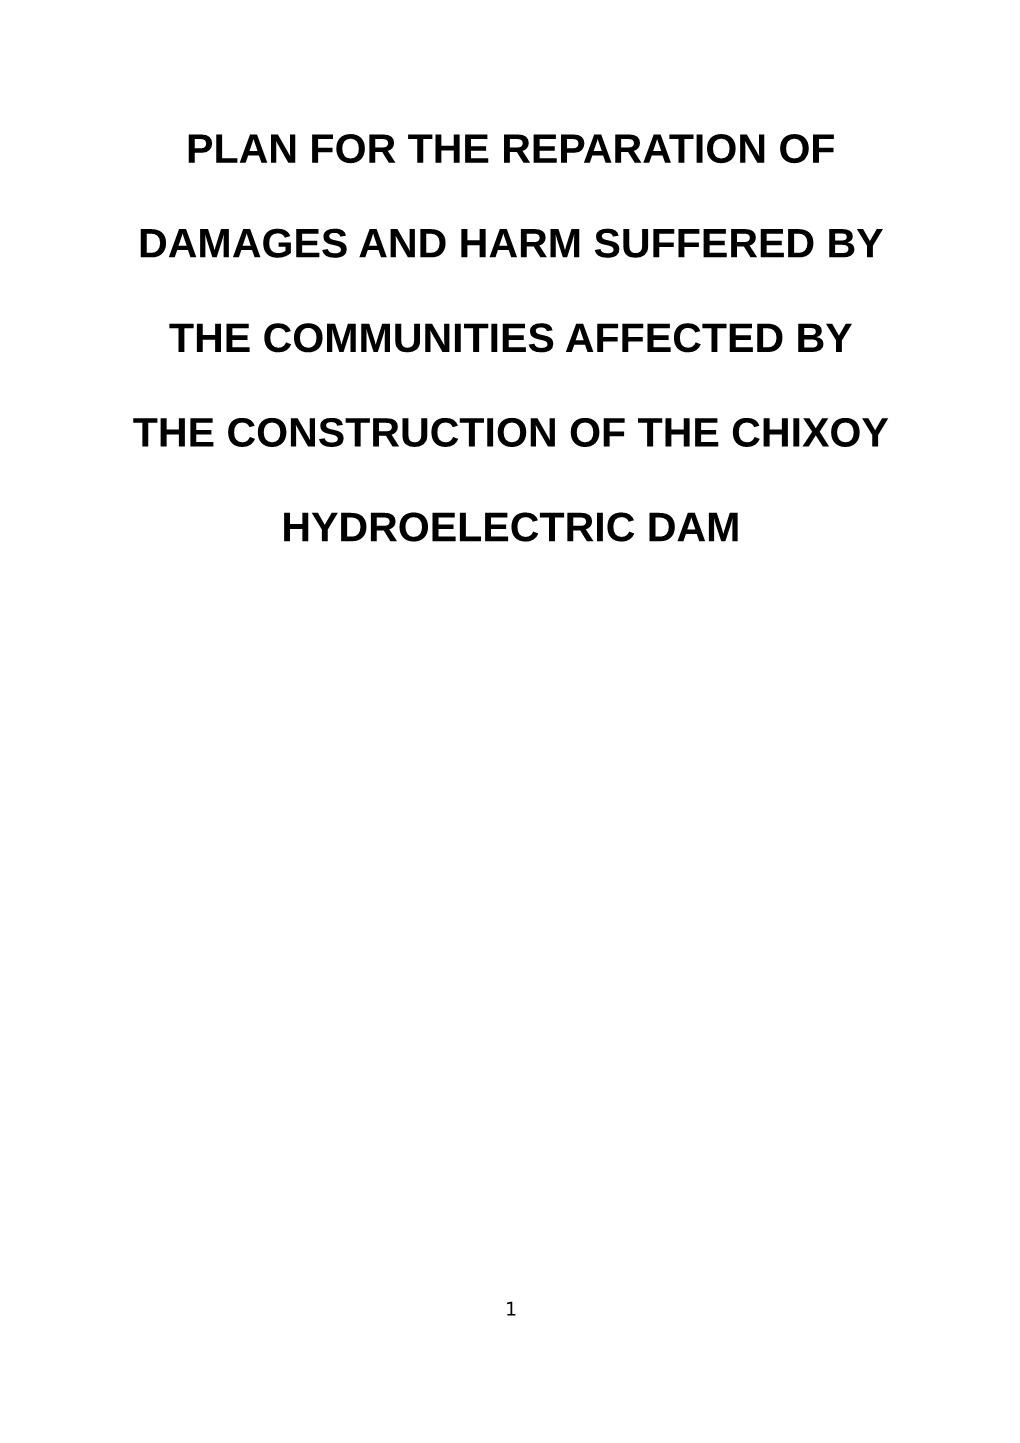 Plan for the Reparation of Damages and Harm Suffered by the Communities Affected by the Construction of the Chixoy Hydroelectric Dam